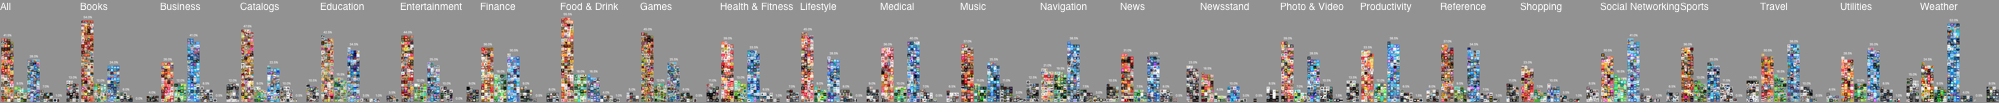 Paid Apps in Every Chart